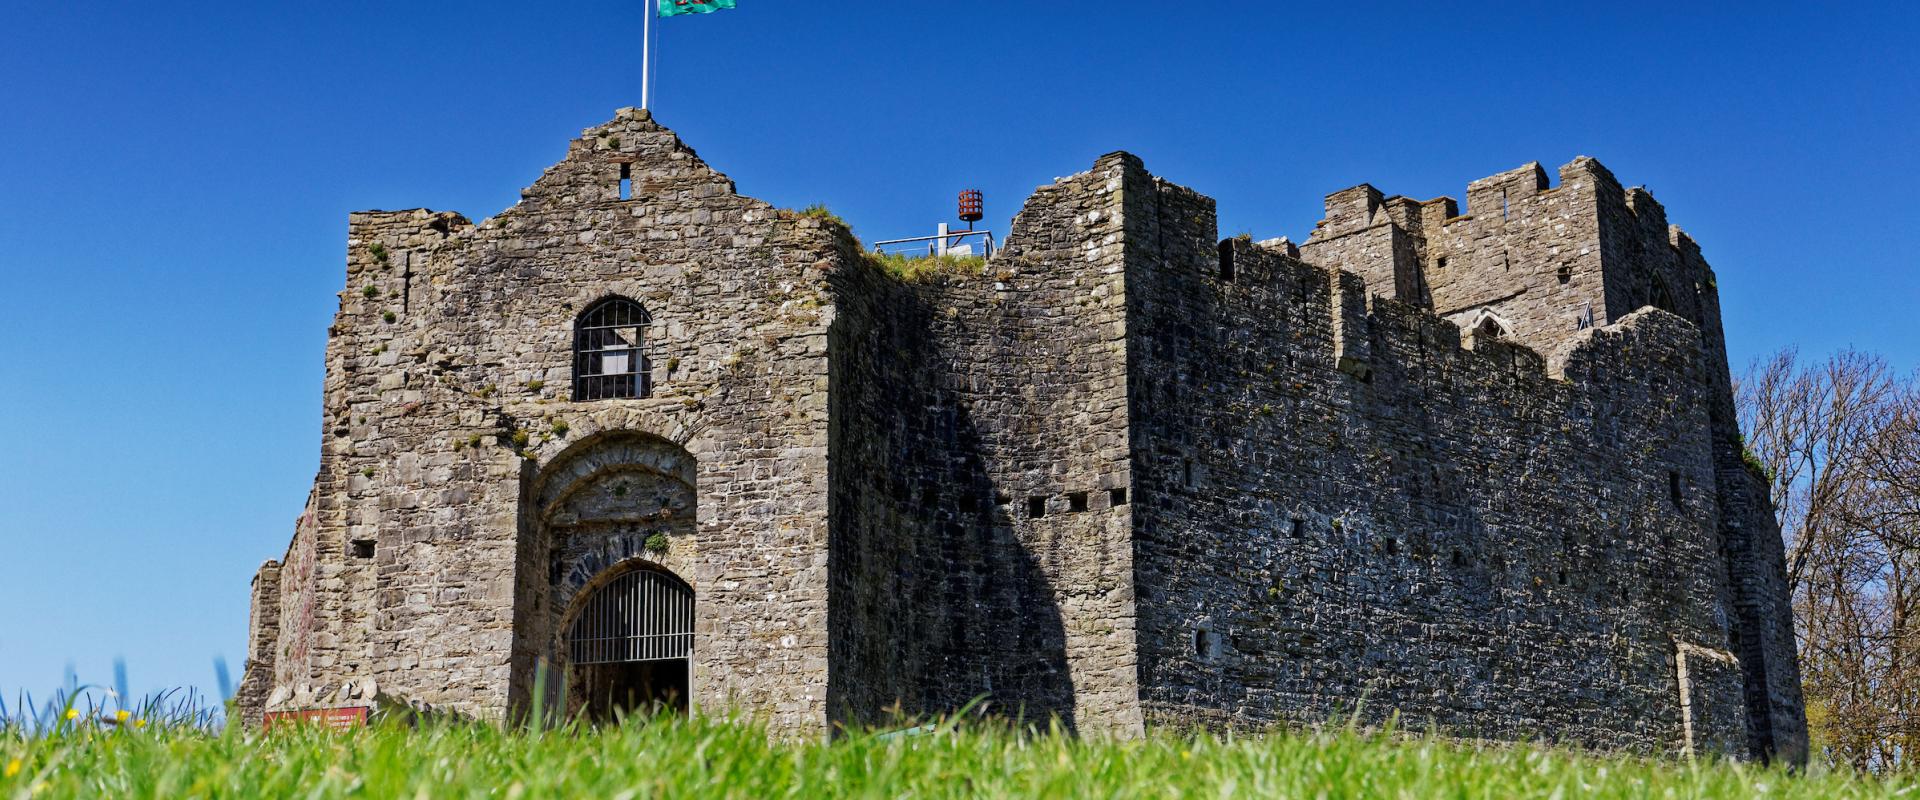 outside image of Oystermouth Castle